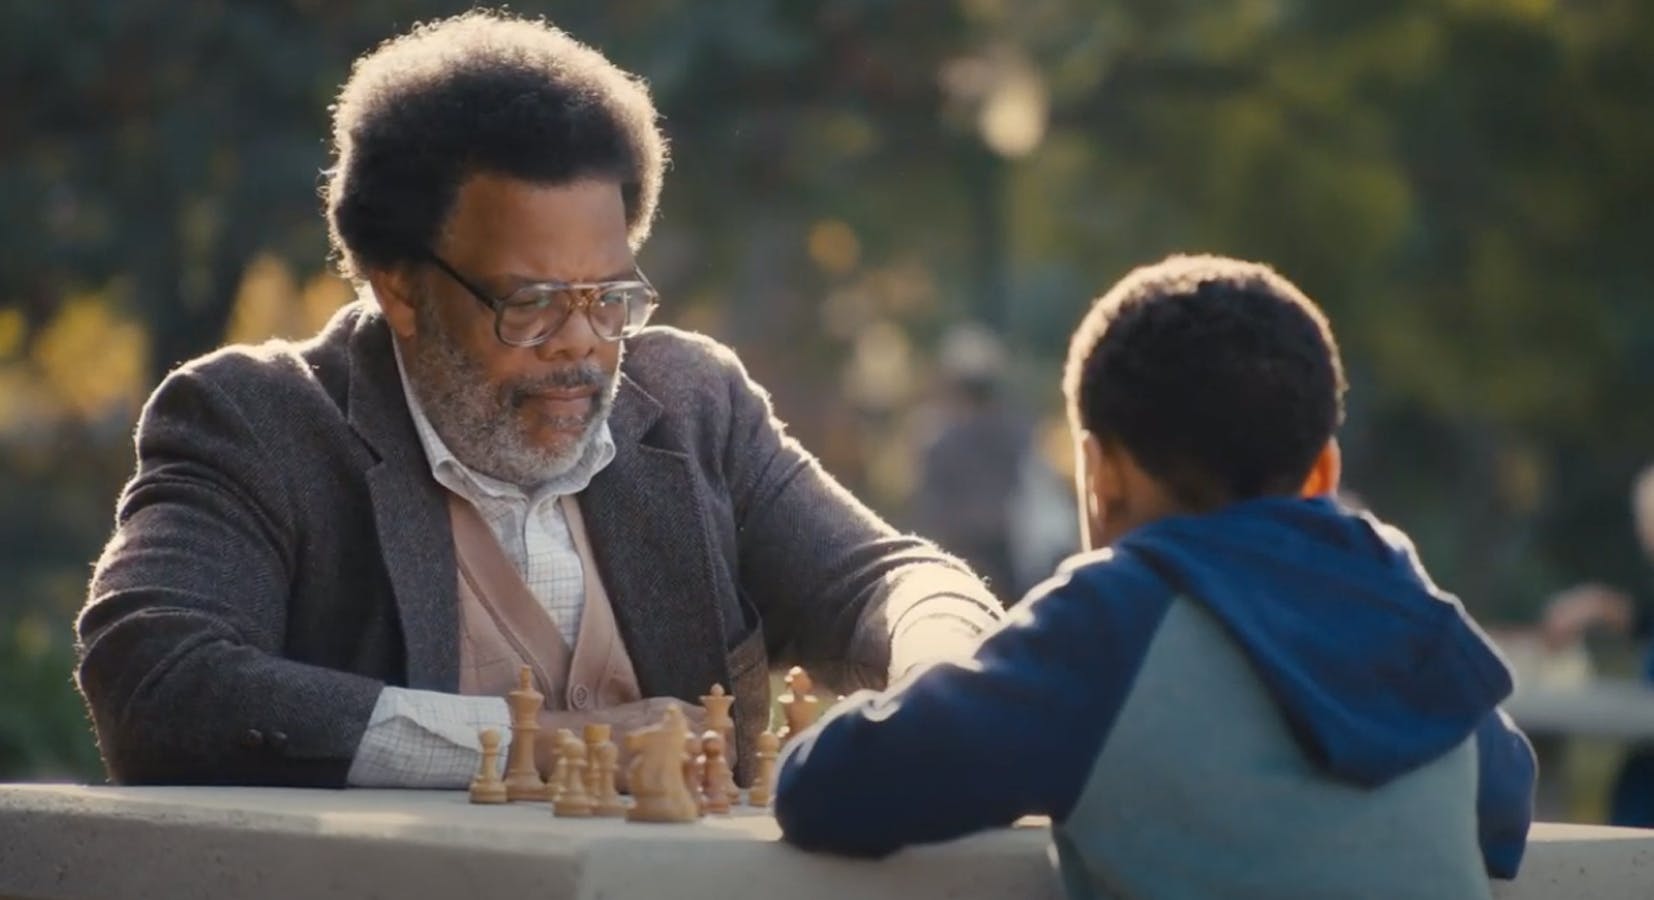 A middle aged bearded man with glasses plays chess outdoors with a boy.